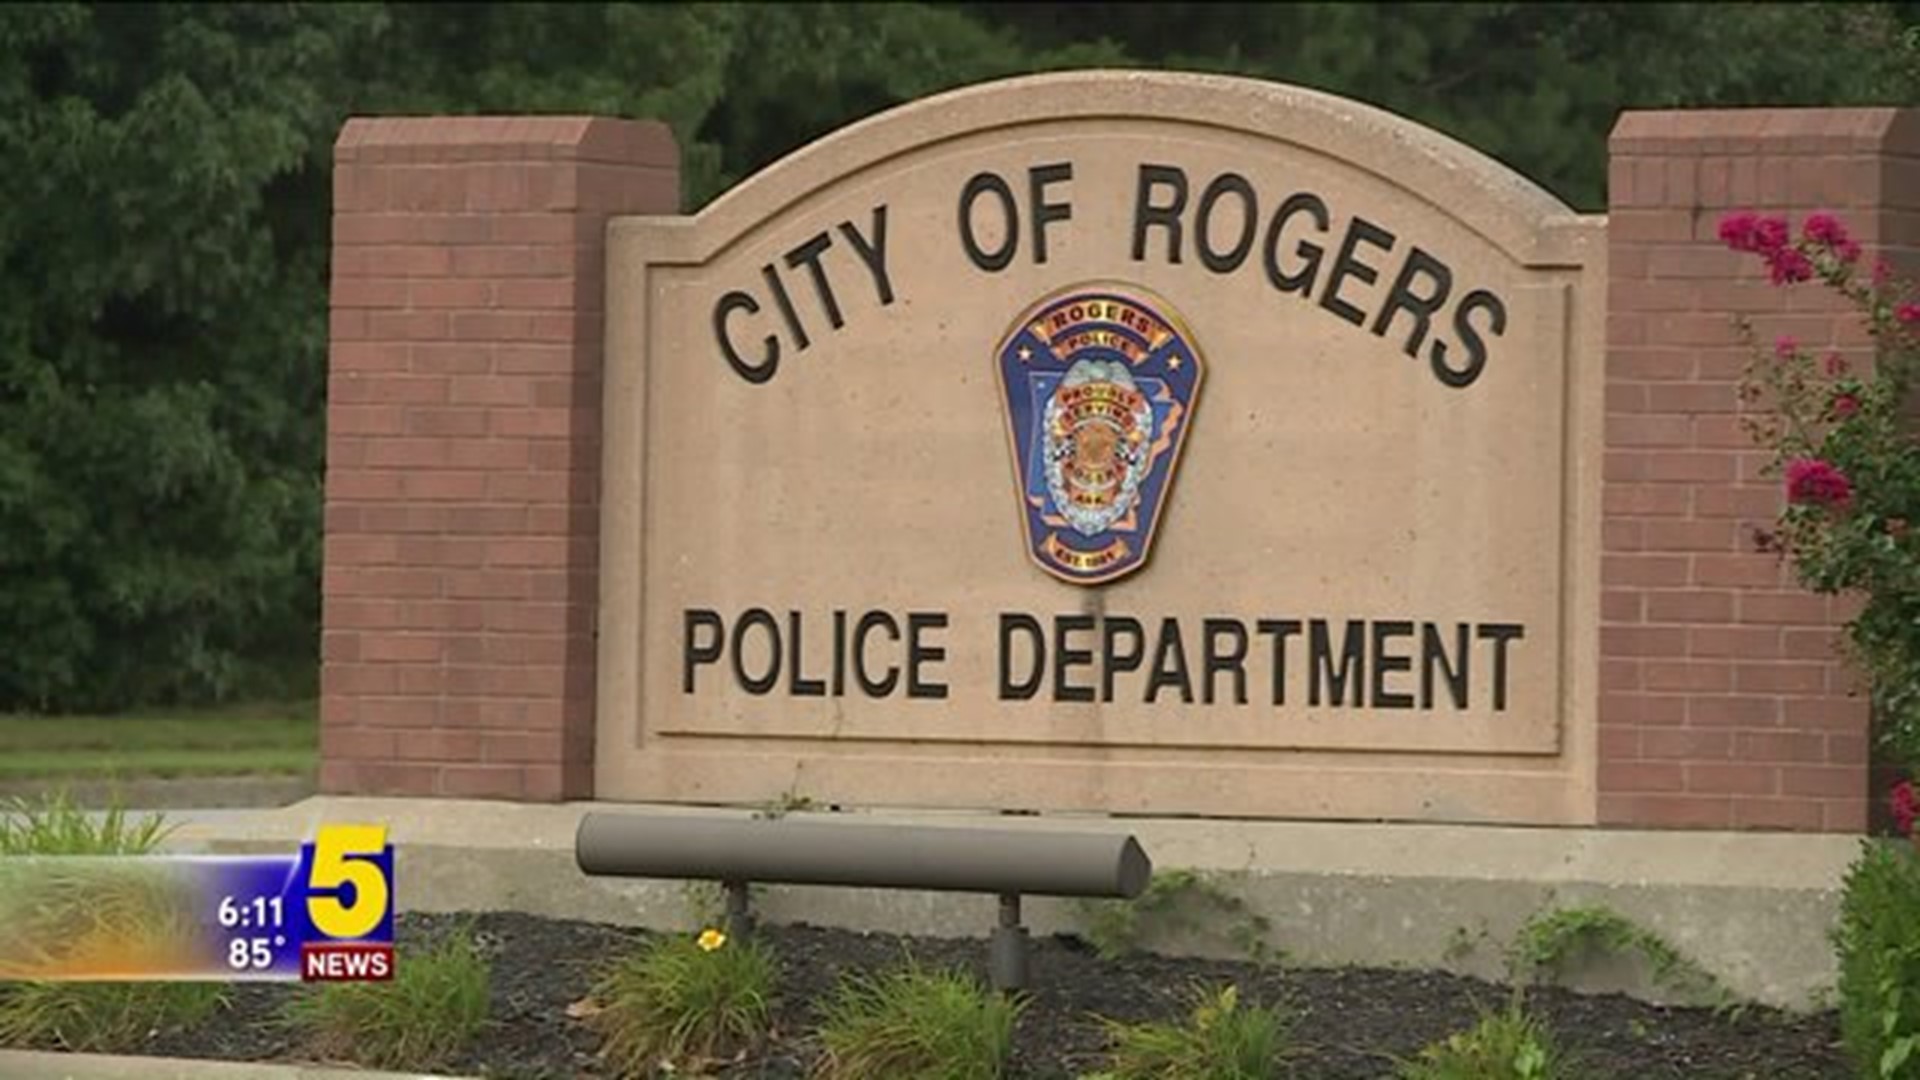 AR-15 Rifle, Loaded Magazines, Police Gear Stolen From Rogers Patrol Car